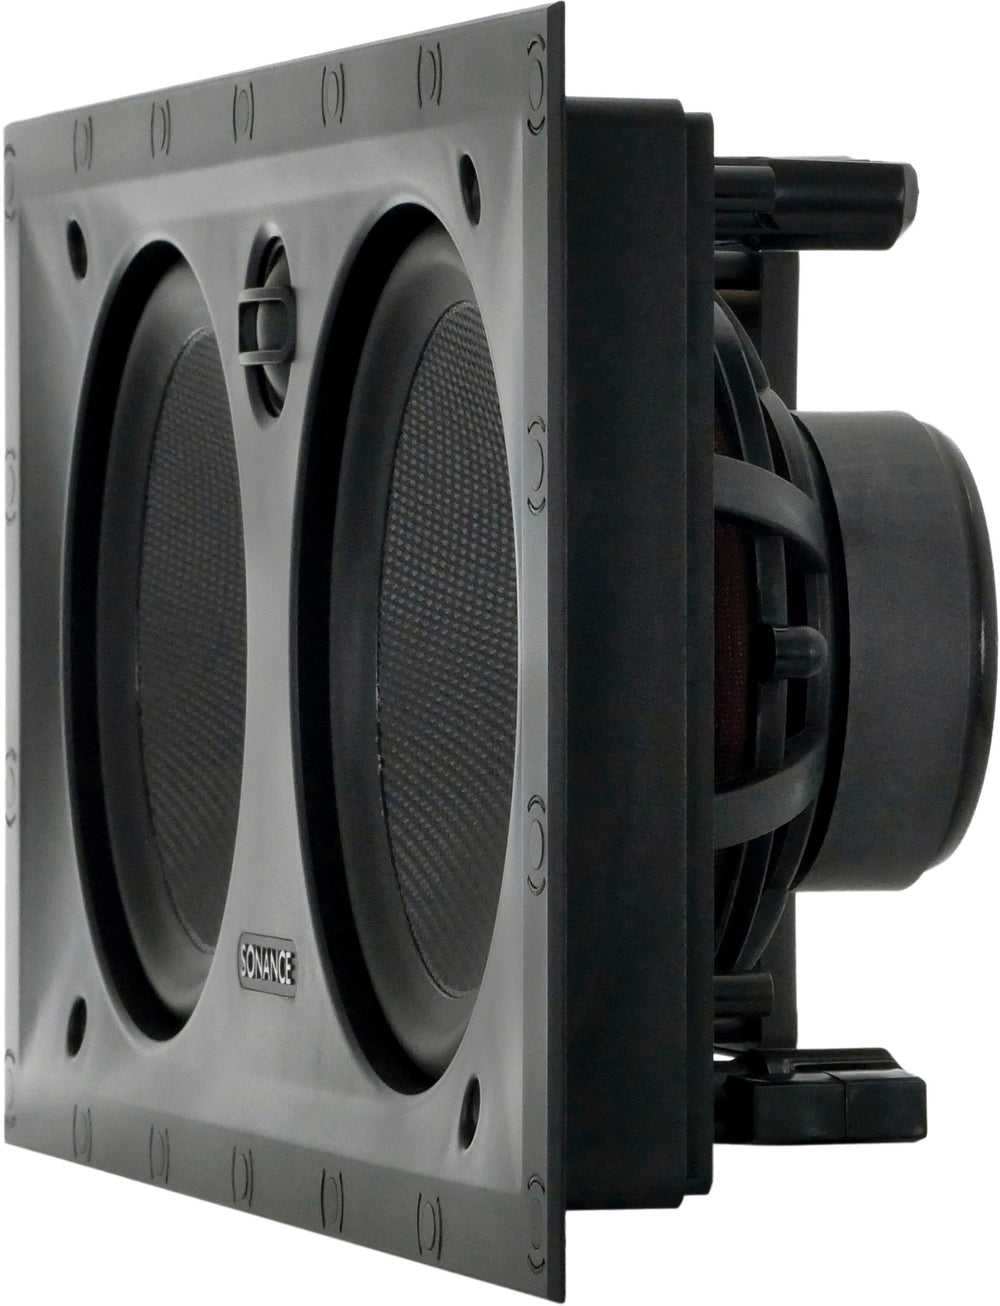 Sonance - Visual Performance 6-1/2" 2-Way In-Wall Rectangle LCR Speaker (Each) - Paintable White_1